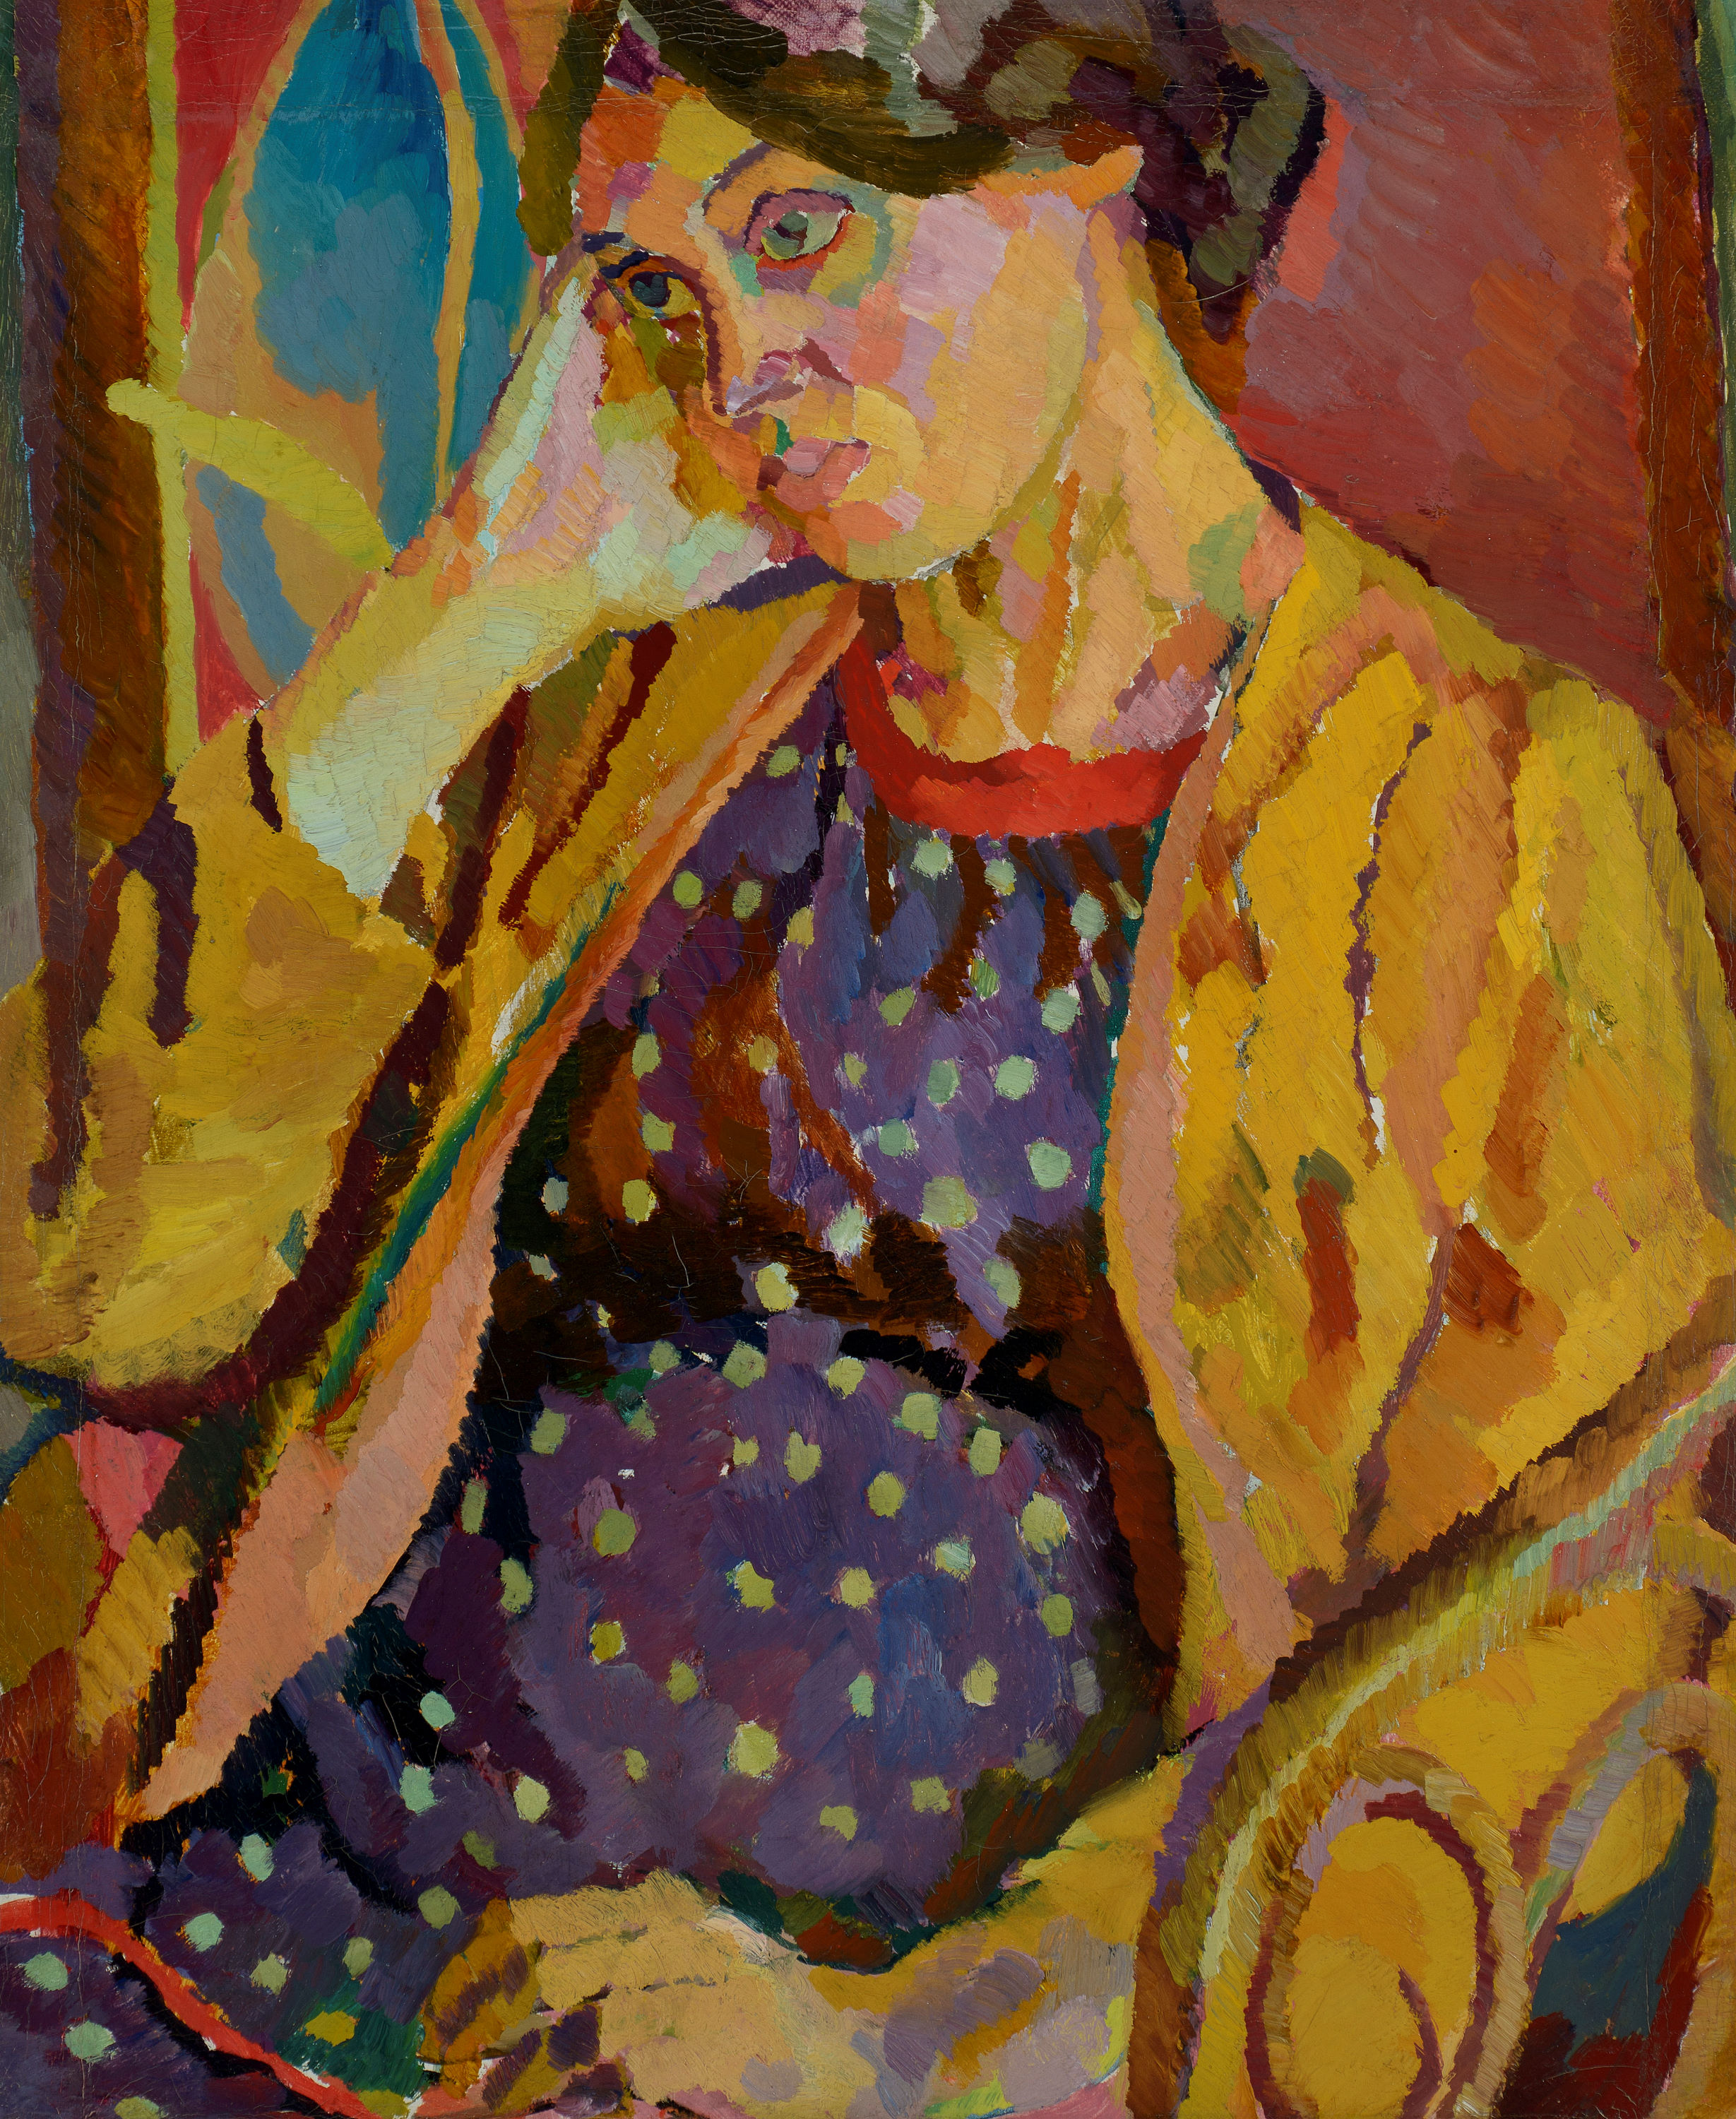 <p><strong>Duncan Grant</strong><br />
<em>Vanessa Bell Pregnant </em>1918<br />
Mackelvie Trust Collection, Auckland Art Gallery Toi o Tāmaki<br />
purchased with the assistance of the National Art Collection Fund, 1992. Frame sponsored by the Portrait Group.<br />
&nbsp;</p>